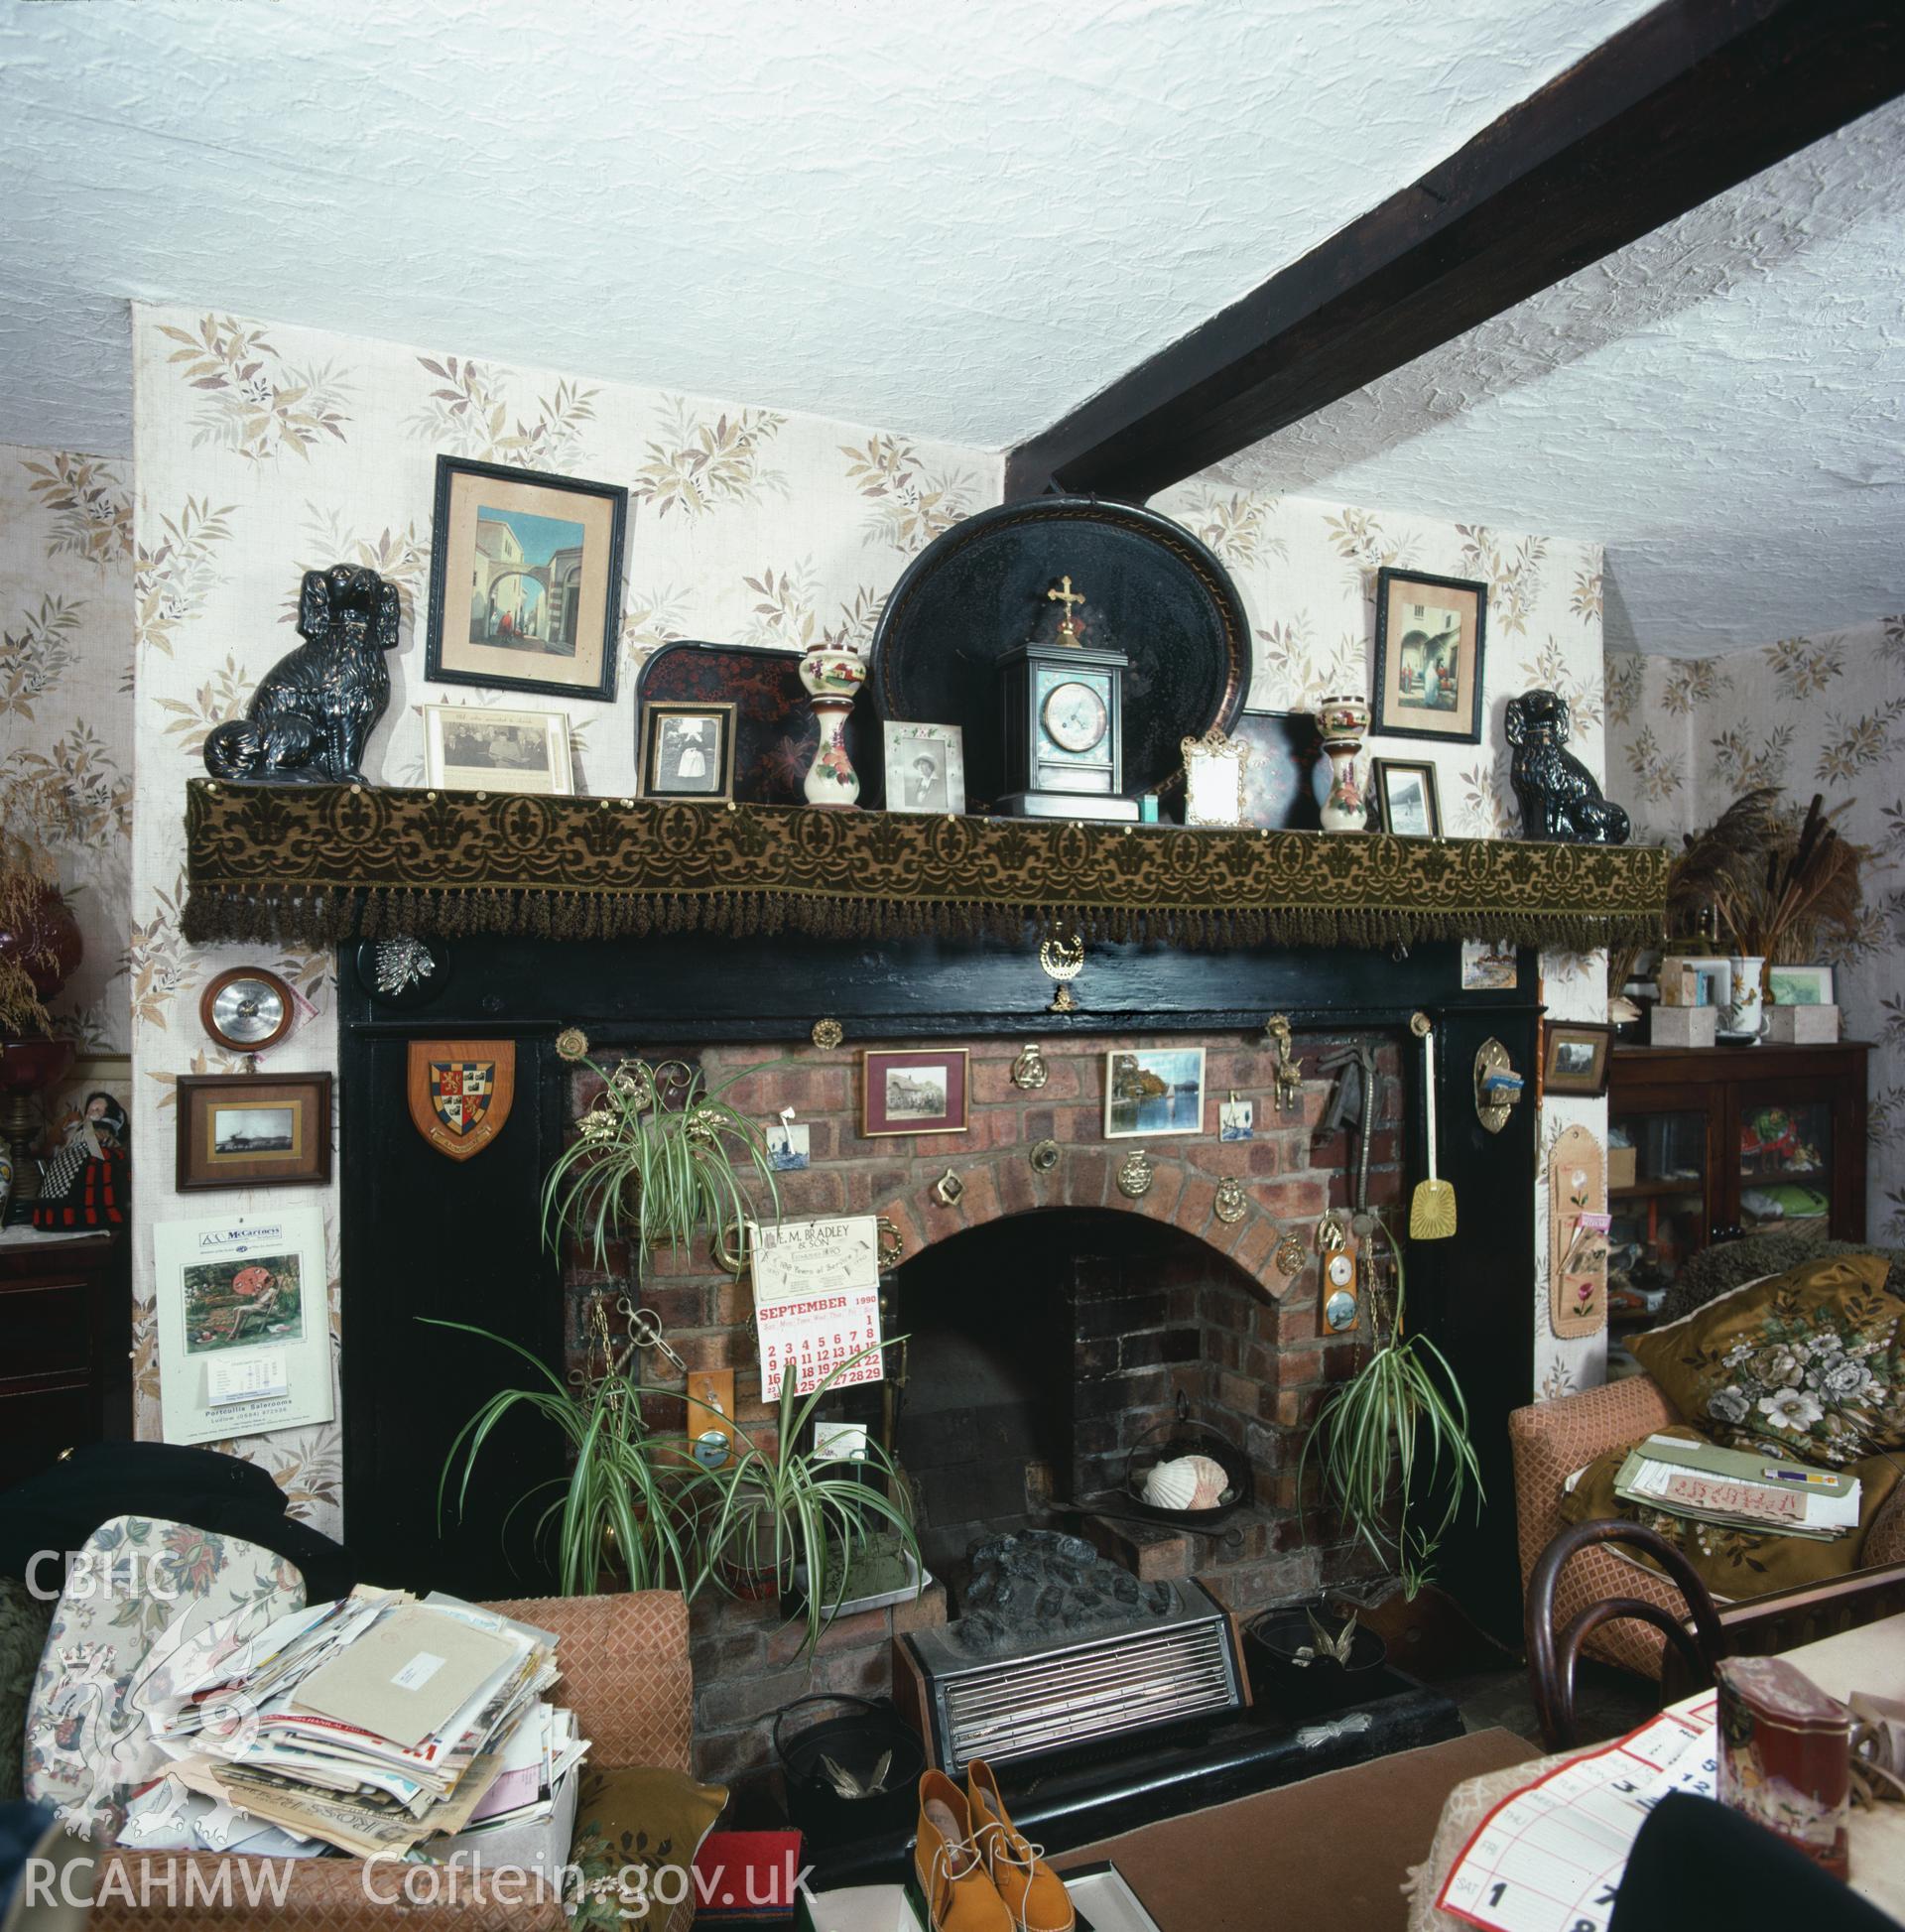 RCAHMW colour transparency showing the fireplace in the sitting room at Glan Ithon Farmhouse, taken by RCAHMW, undated.